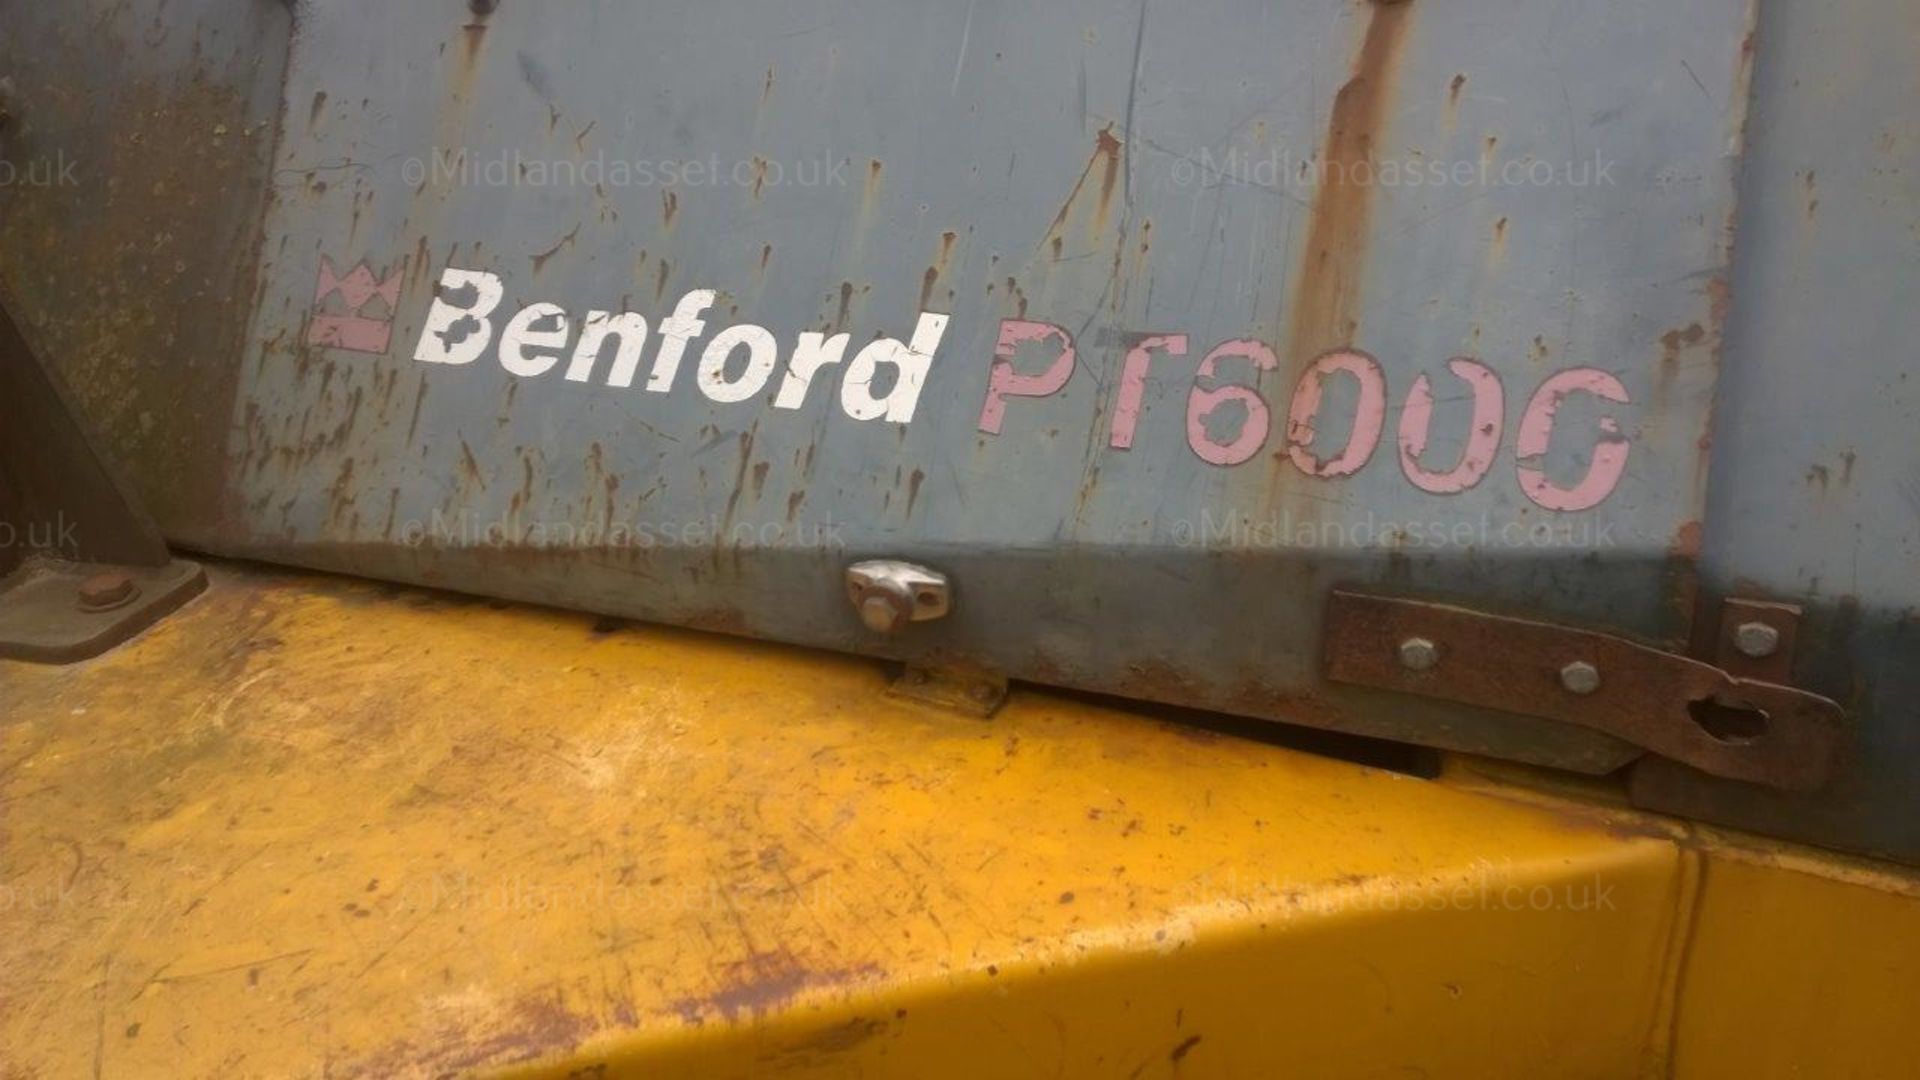 DS - BENFORD PT6000 6 TONNE DUMPER   4x4   COLLECTION FROM CHESTERFIELD - Image 3 of 6